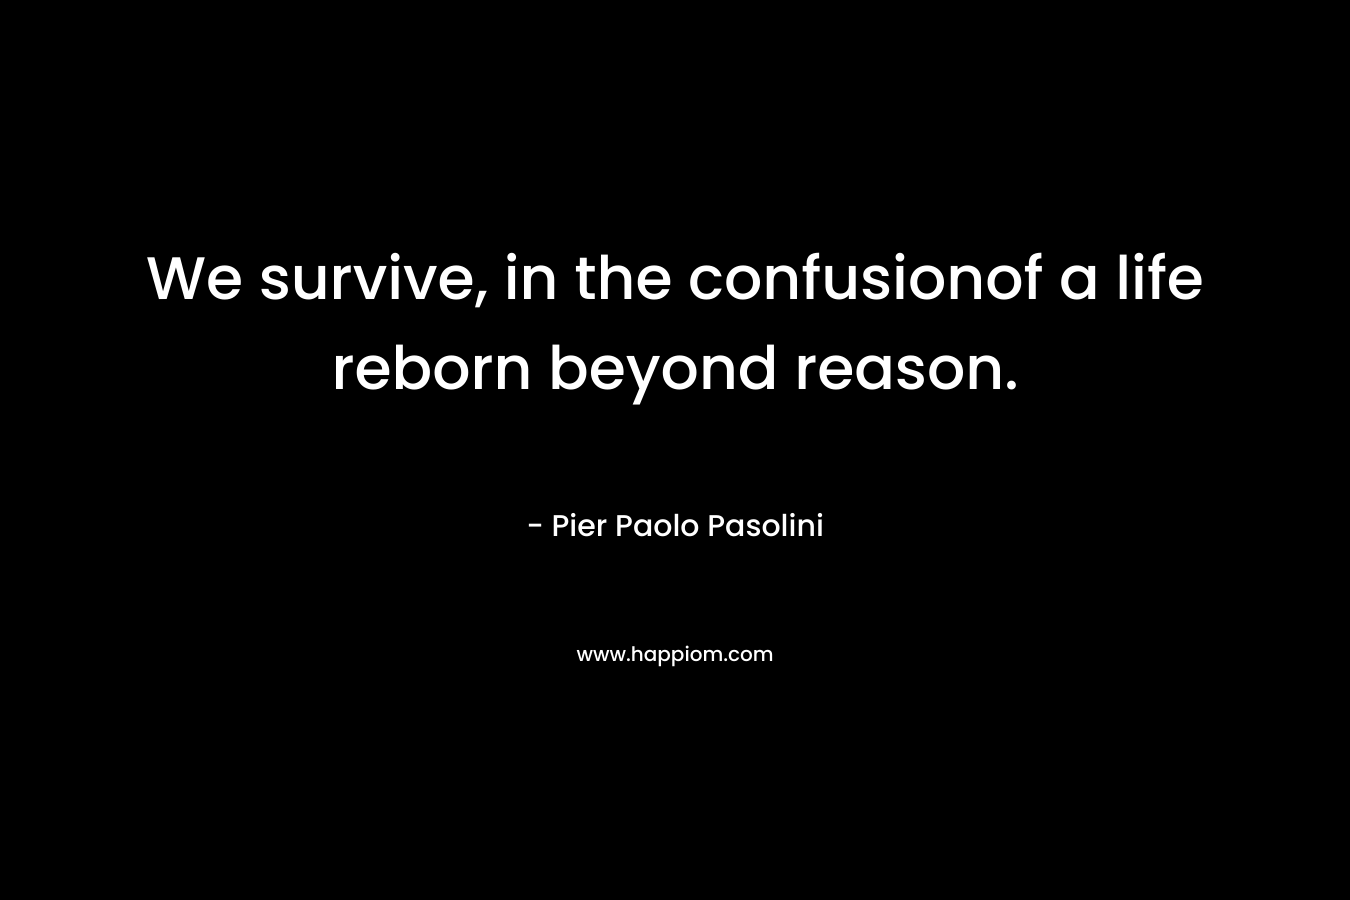 We survive, in the confusionof a life reborn beyond reason. – Pier Paolo Pasolini